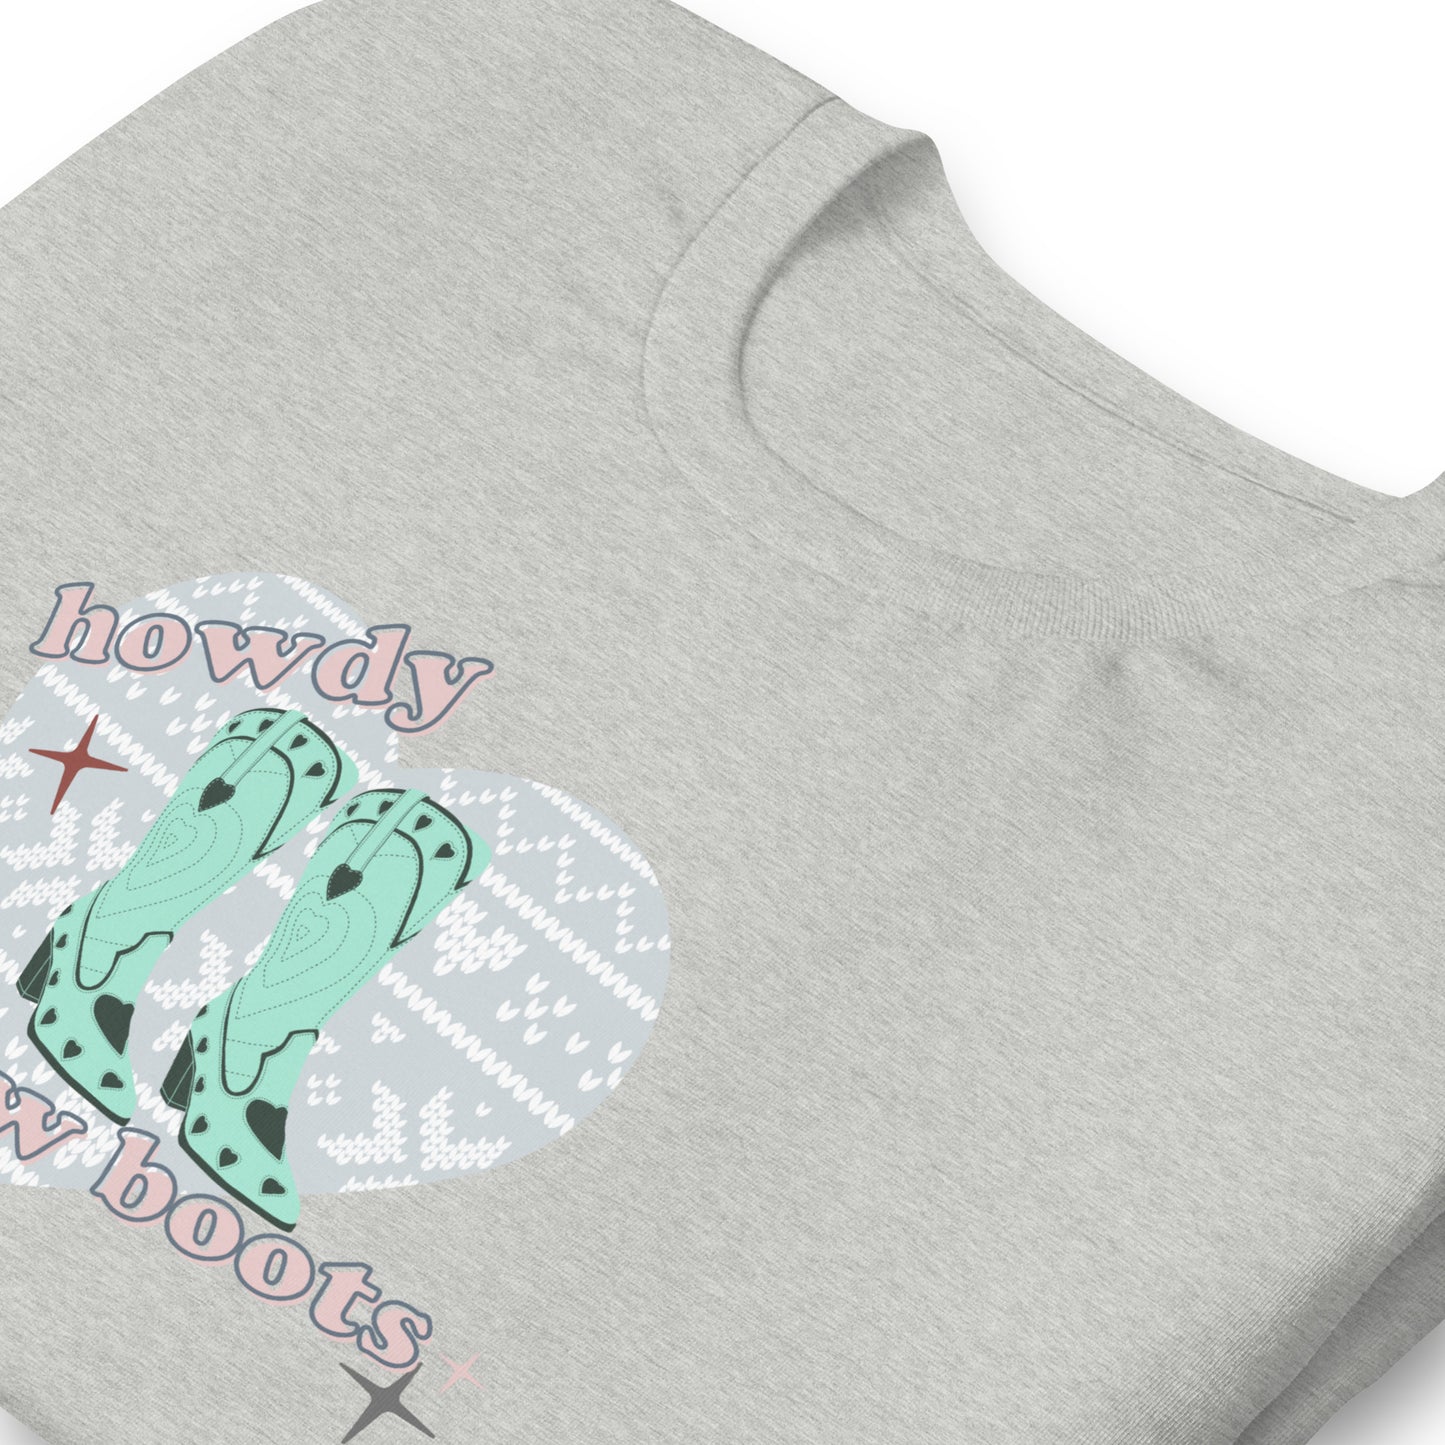 Howdy Snow Boots T-Shirt